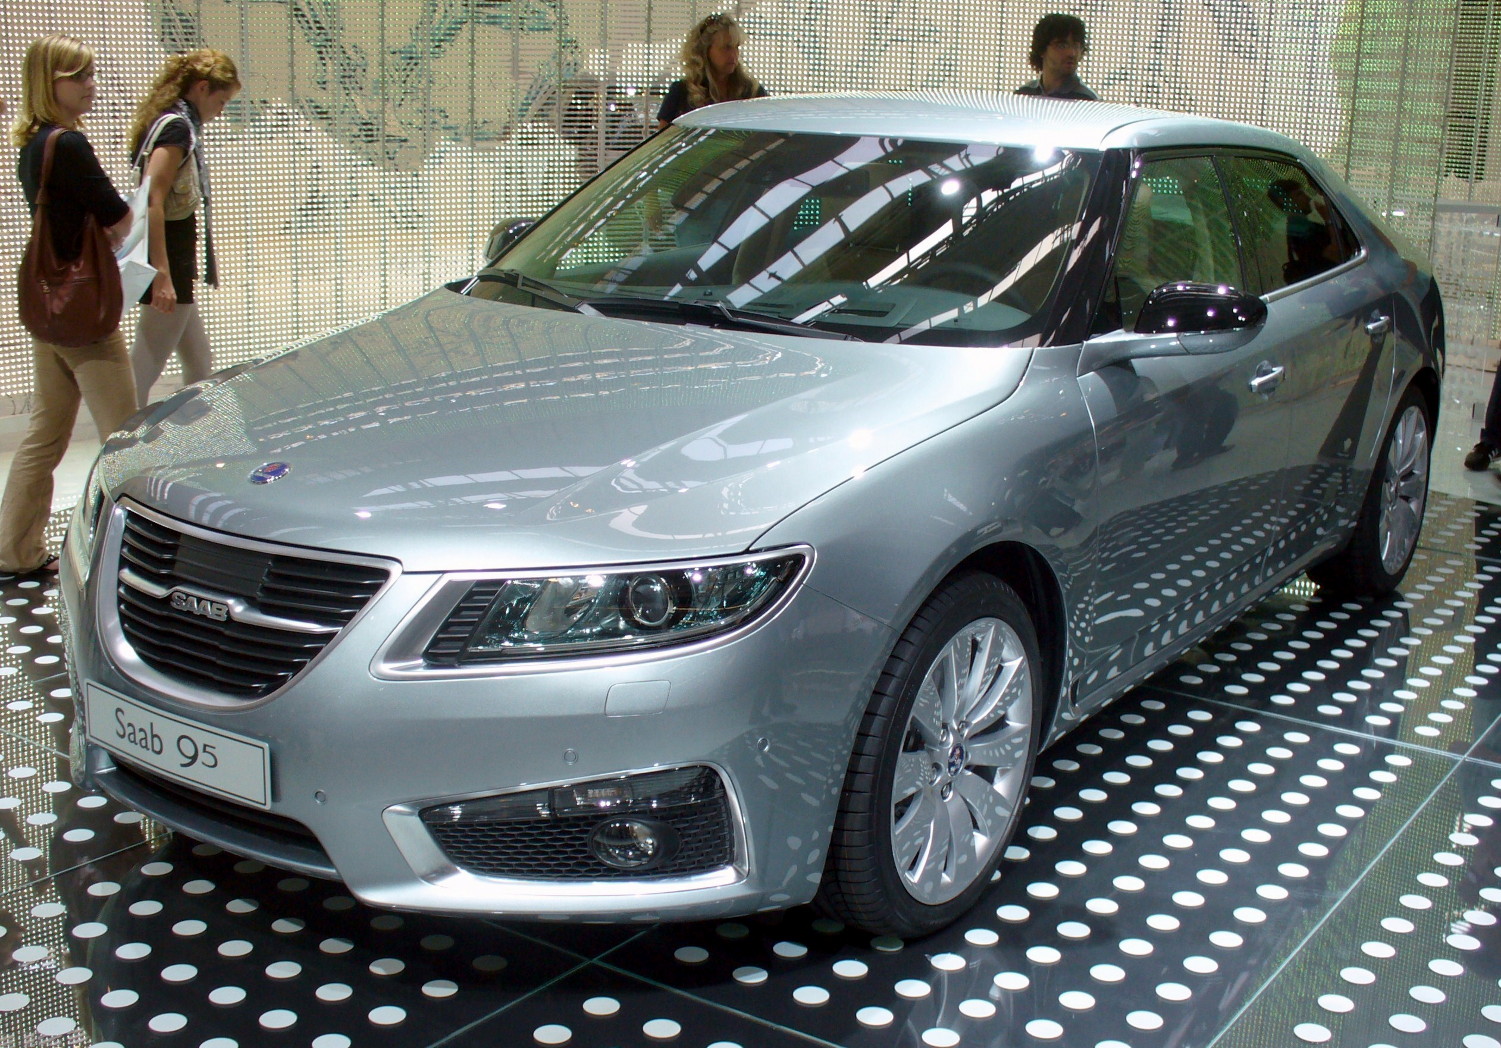 Saab 97 V4 Sonett Photo Gallery: Photo #02 out of 9, Image Size ...